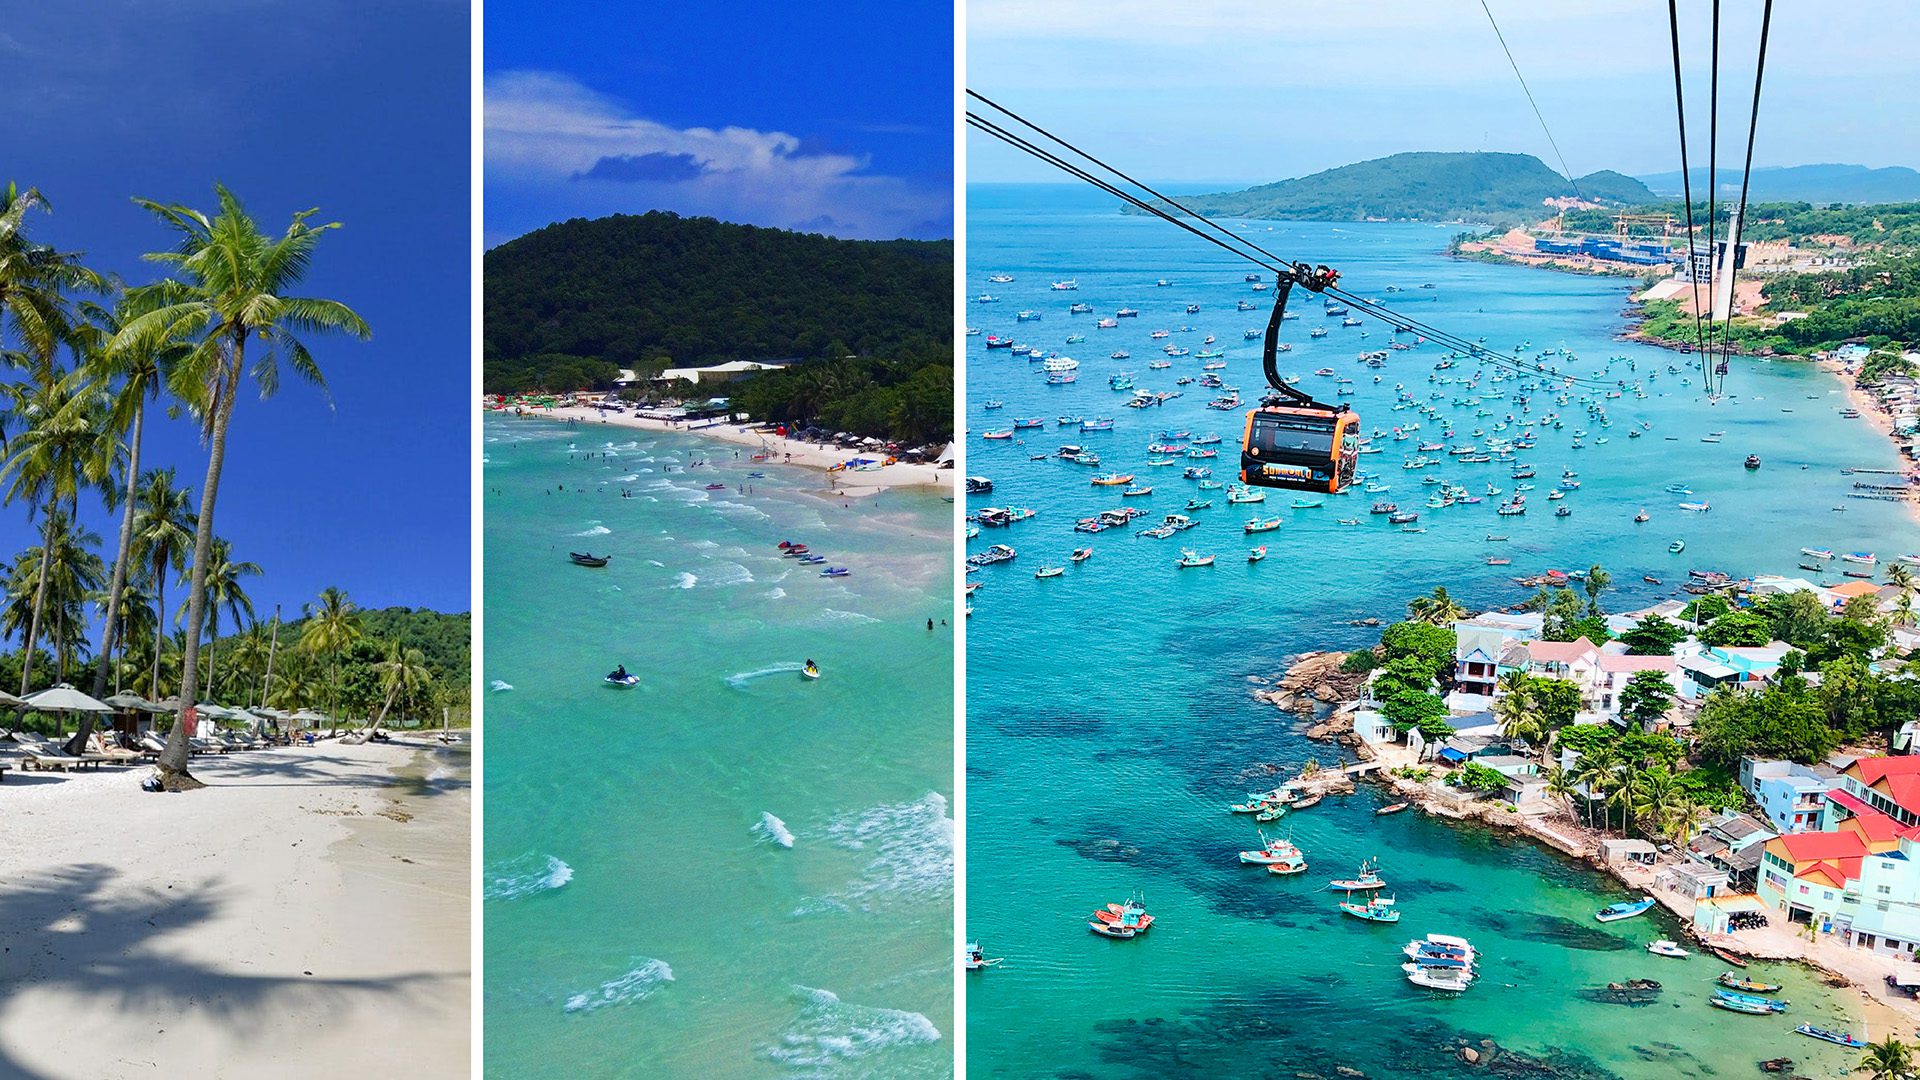 Vietnam to open Phu Quoc, Halong Bay, Hoi An, Dalat and Nha Trang for leisure travel